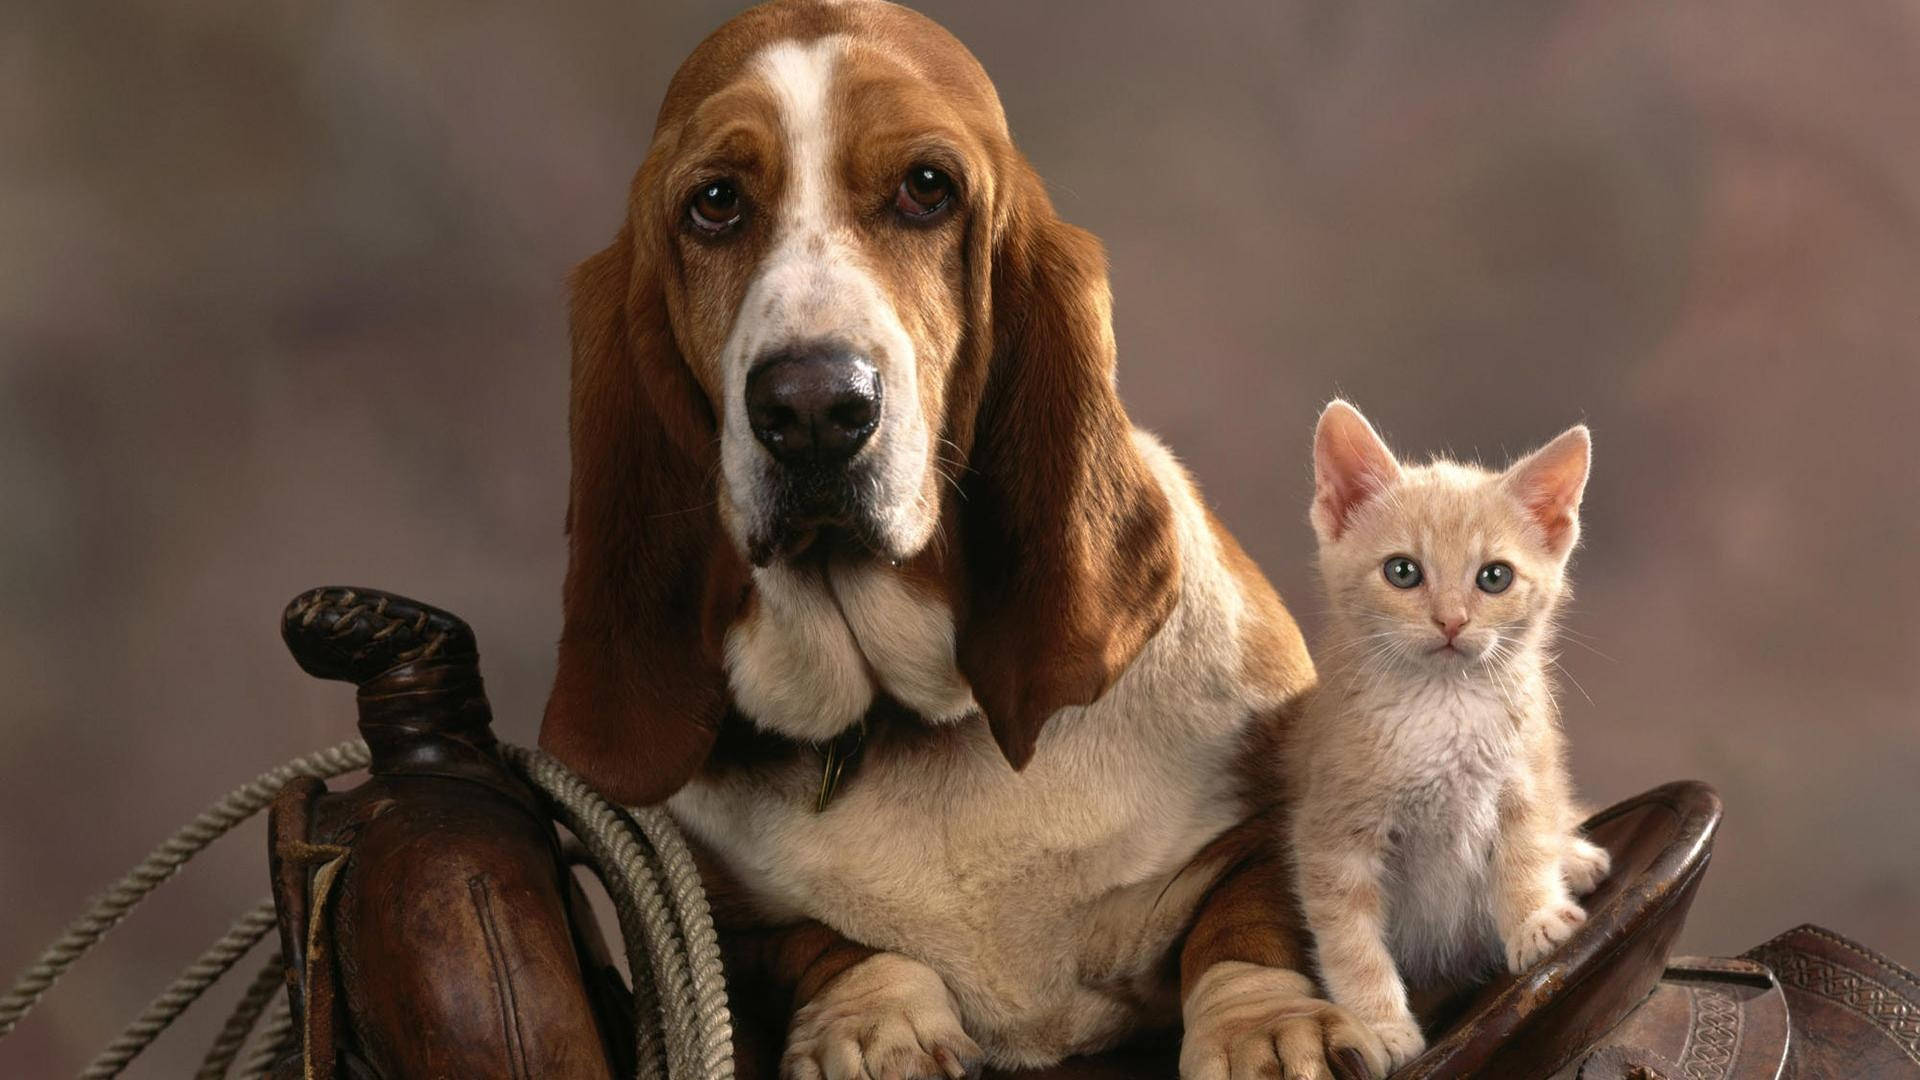 Cat And Dog On Saddle Wallpaper